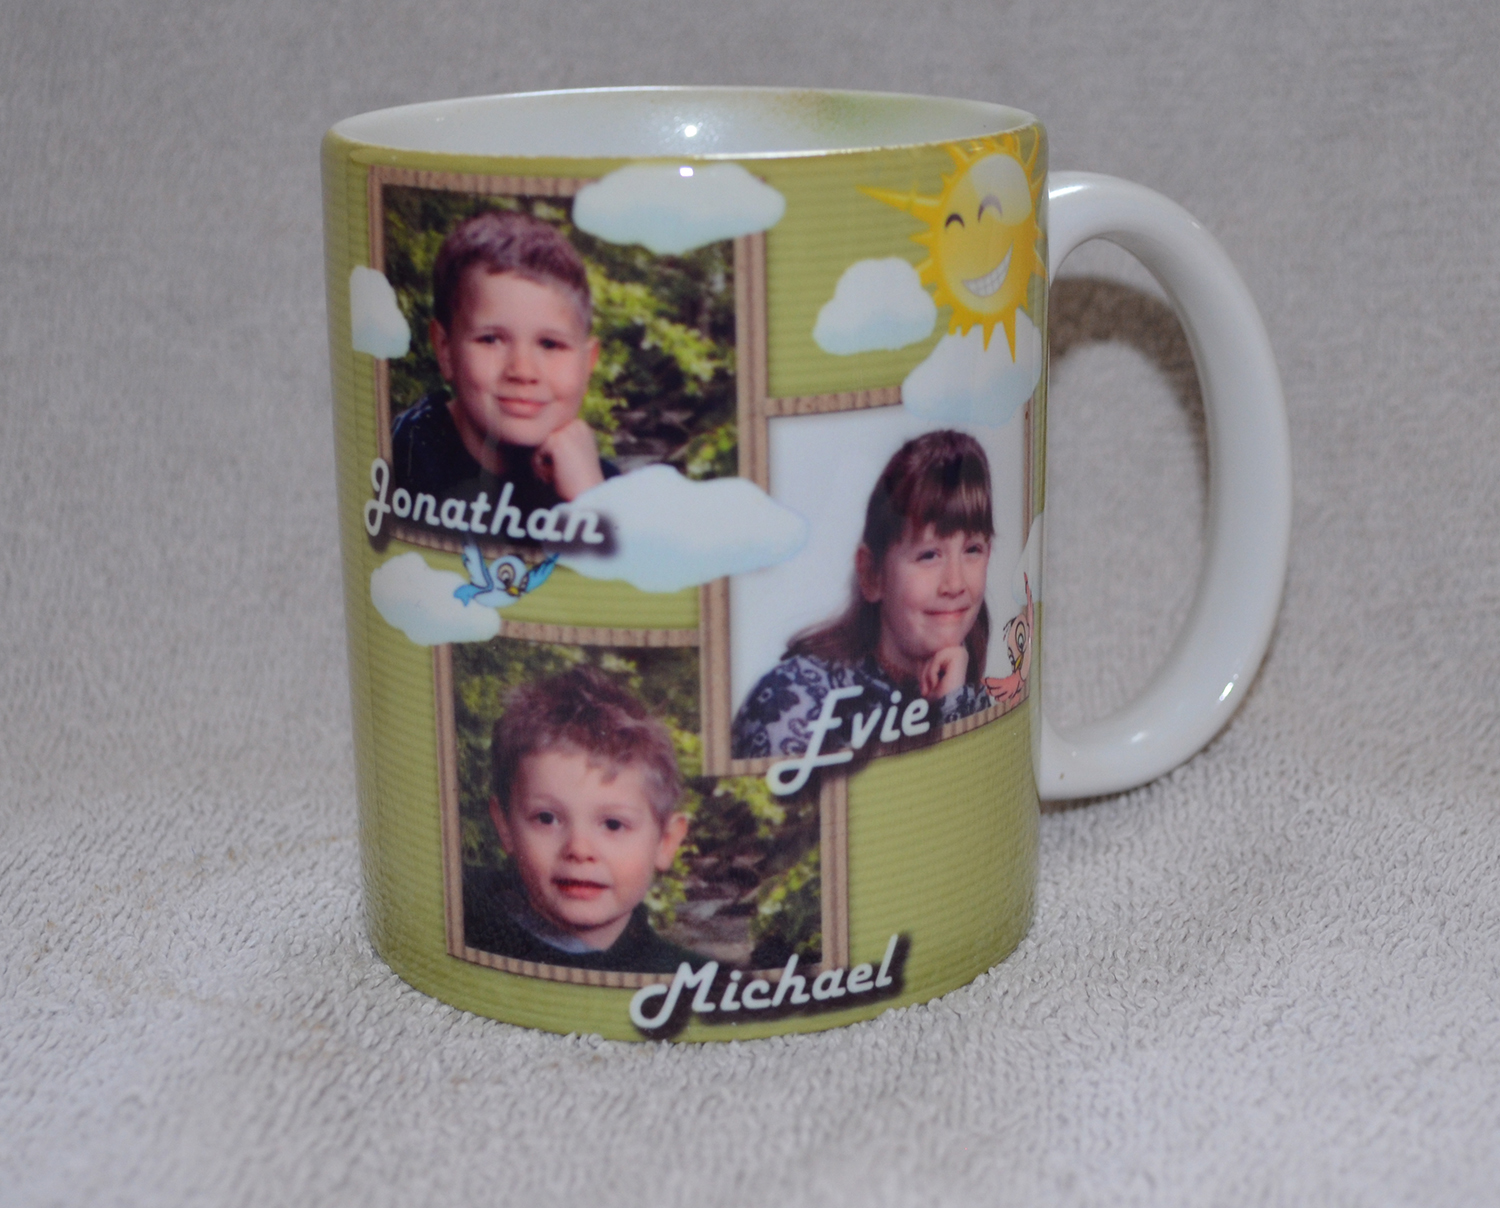 Grammie Mugs made with sublimation printing